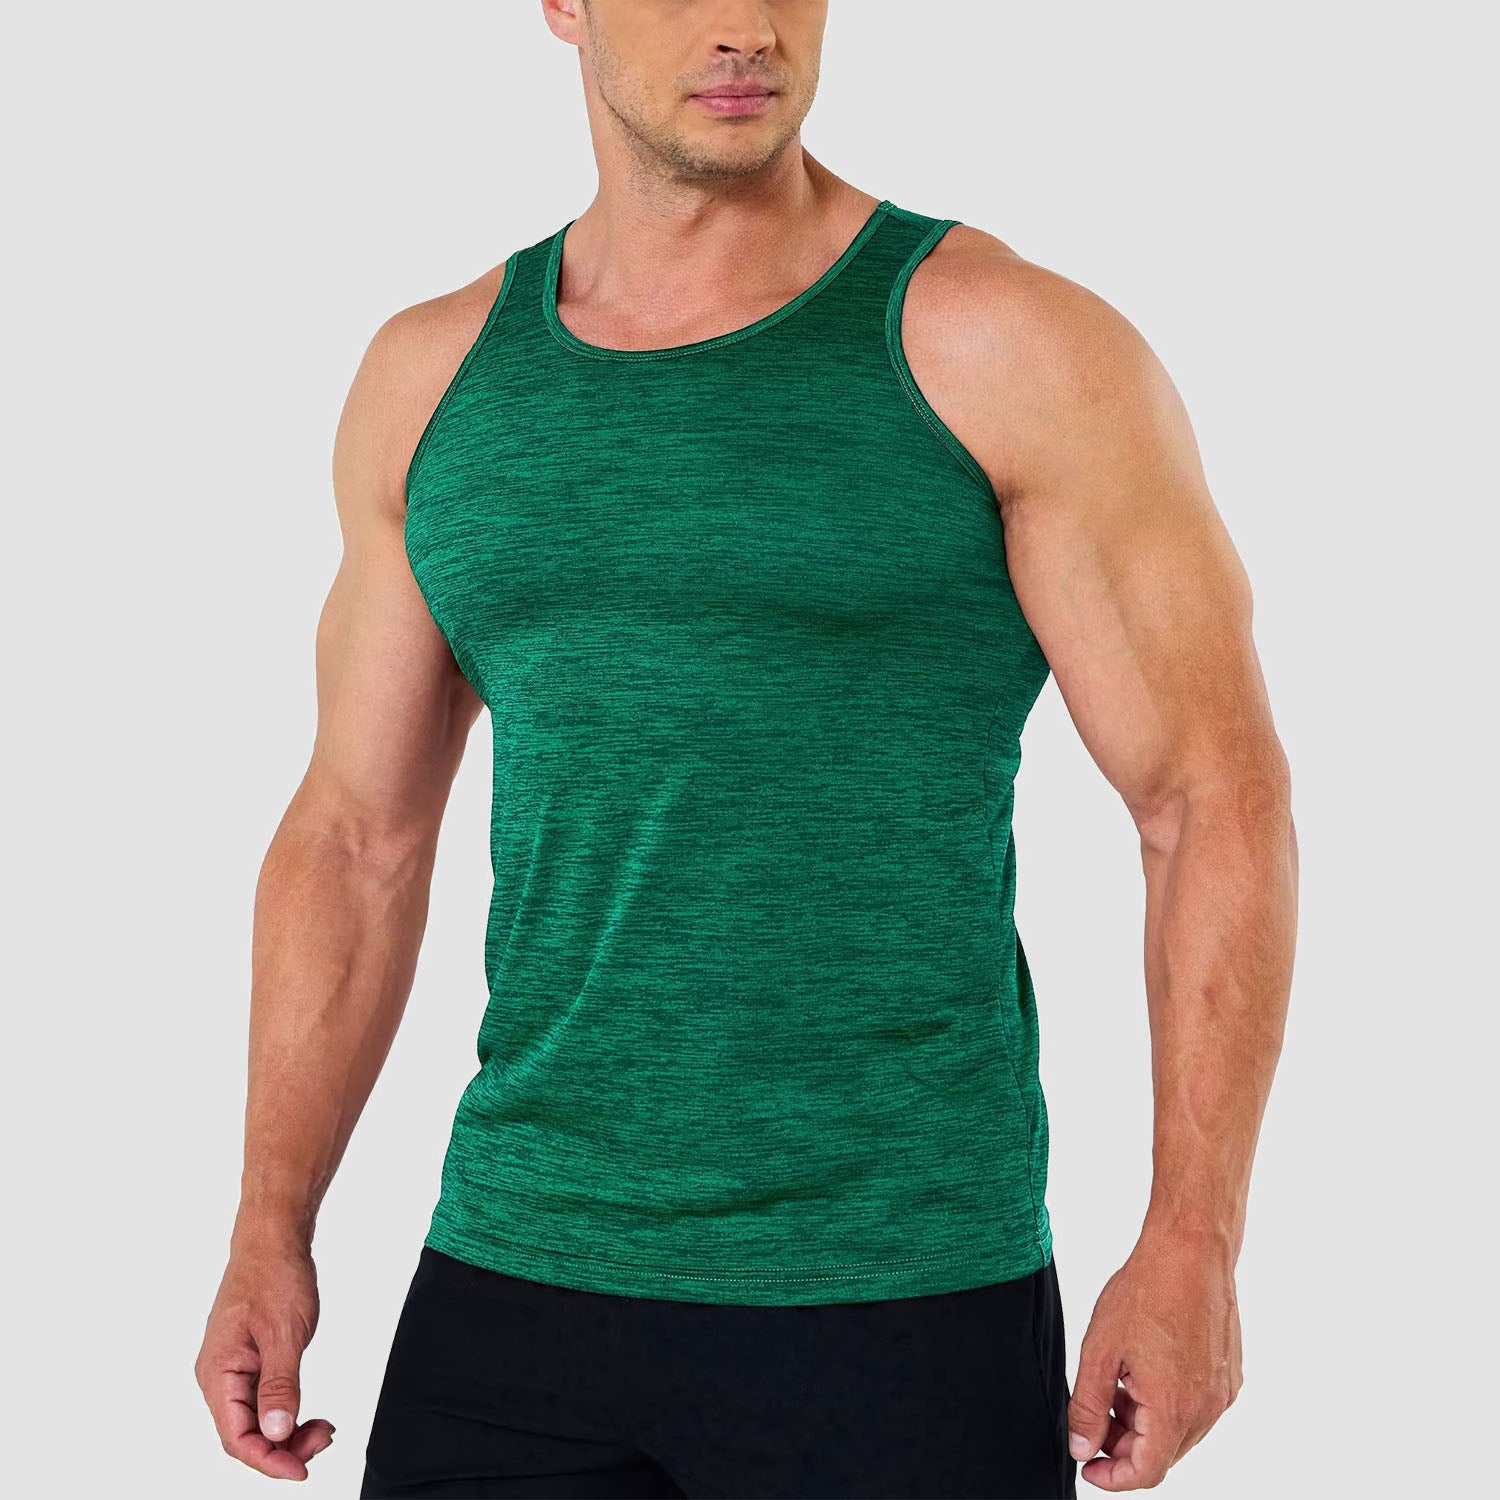 Men's Tank Tops Quick Dry Workout Sleeveless Gym Muscle Shirts